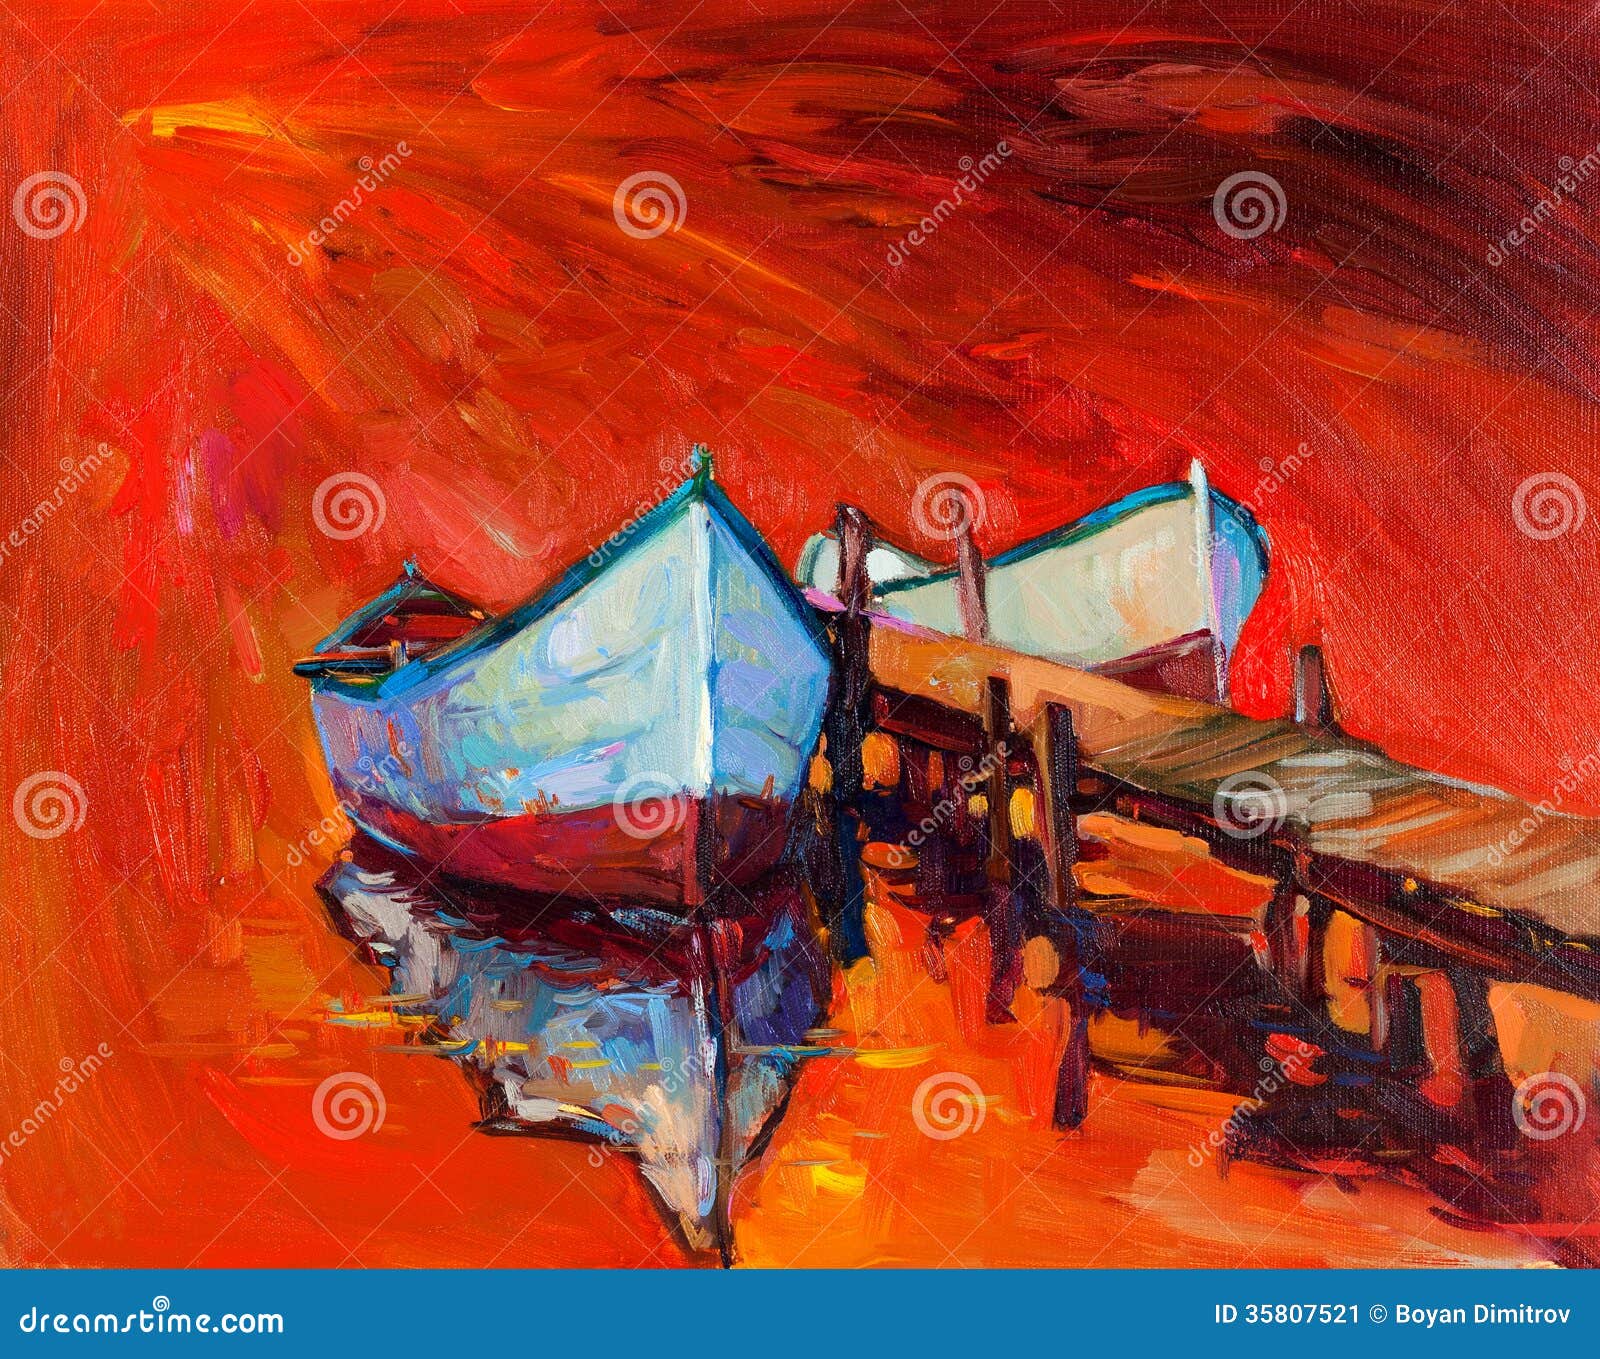 Original oil painting of boats and jetty(pier) on canvas.Sunset over 